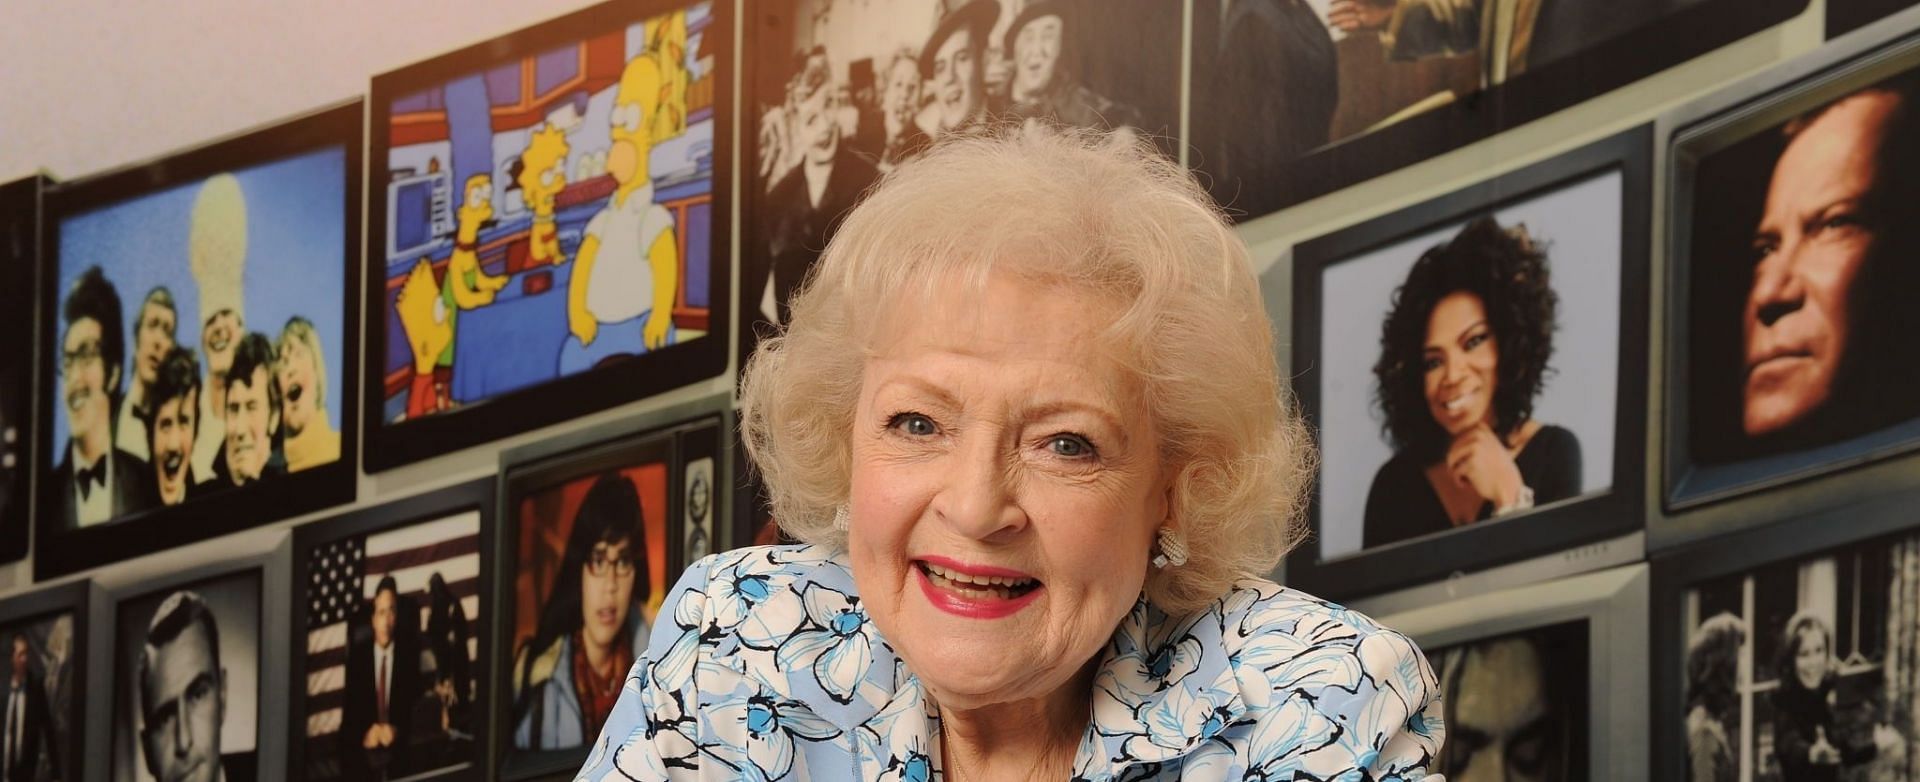 Nylan Burton faced severe criticism for wishing upon Queen Elizabeth&#039;s death instead of Betty White (Image via Bob Riha, Jr./Getty Images)